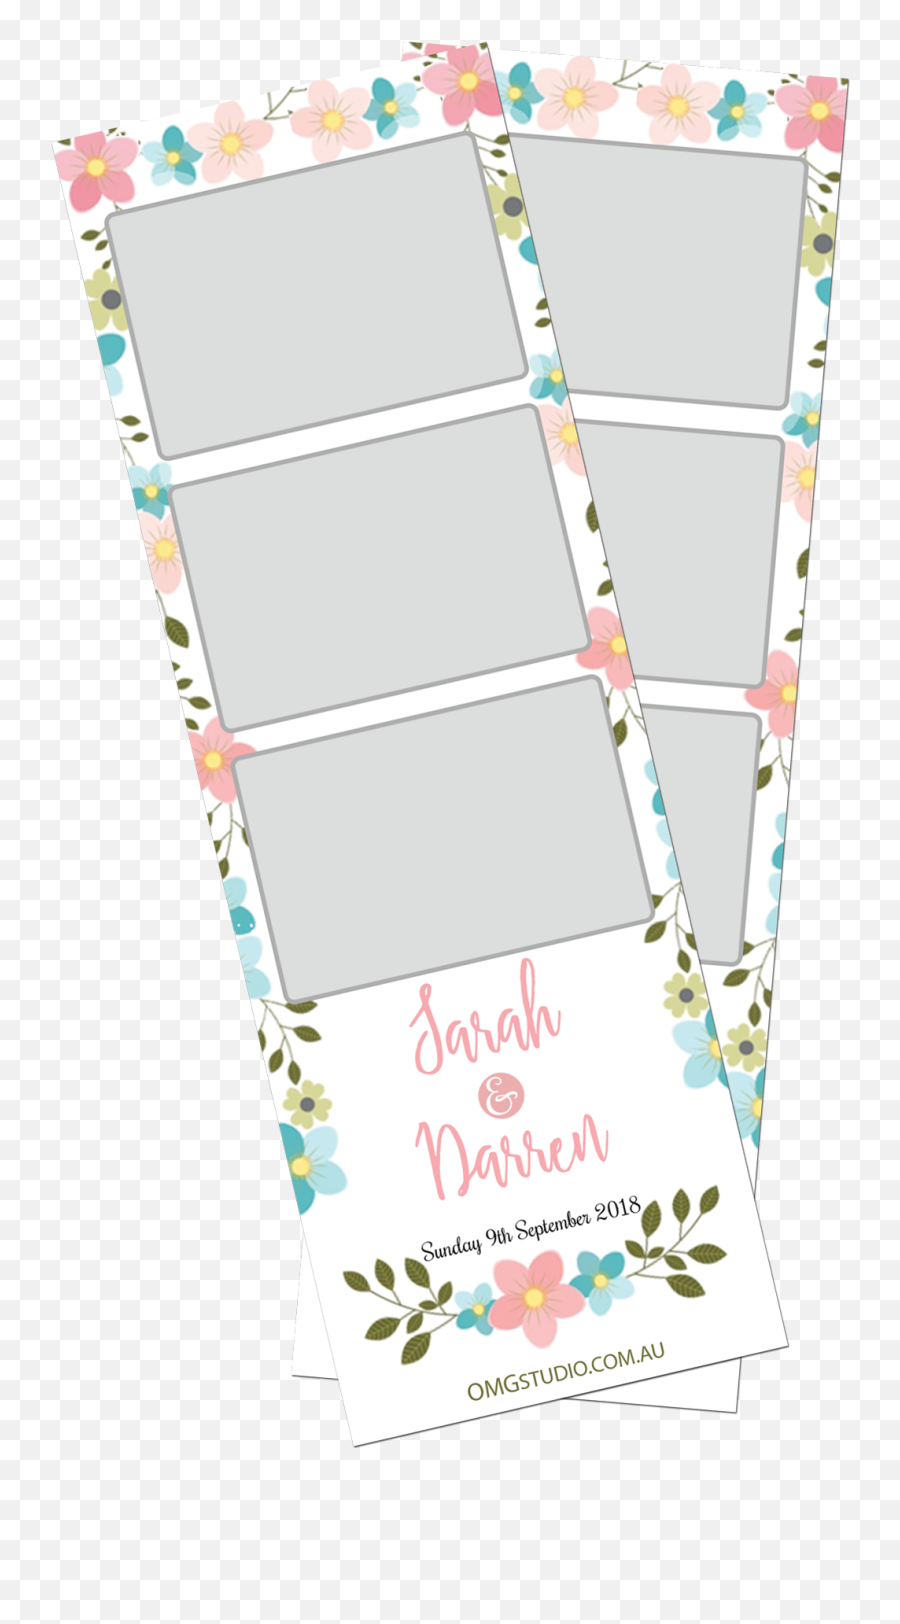 Download Pastel Flowers Photobooth Print - Paper Full Size Screenshot Png,Pastel Flowers Png